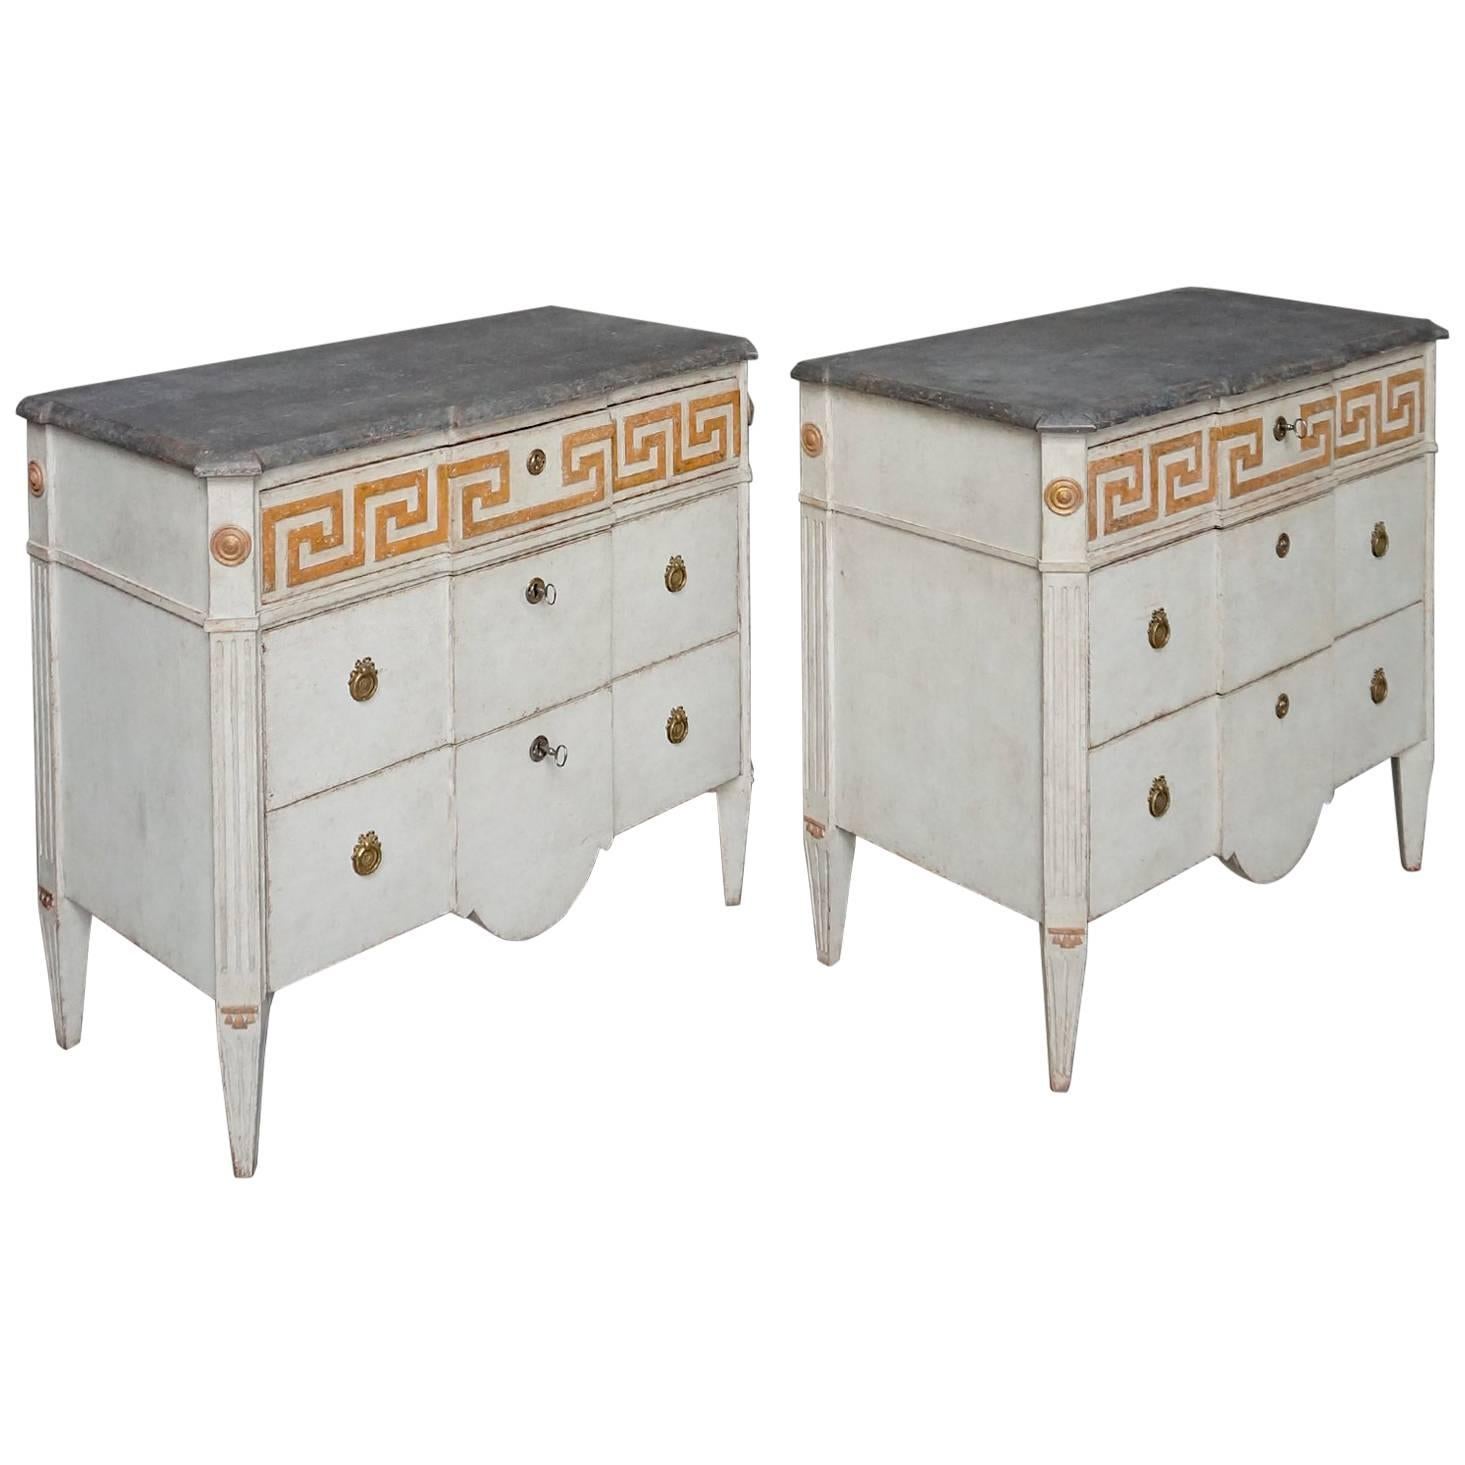 Pair of Neoclassical Commodes with Greek Key Detail